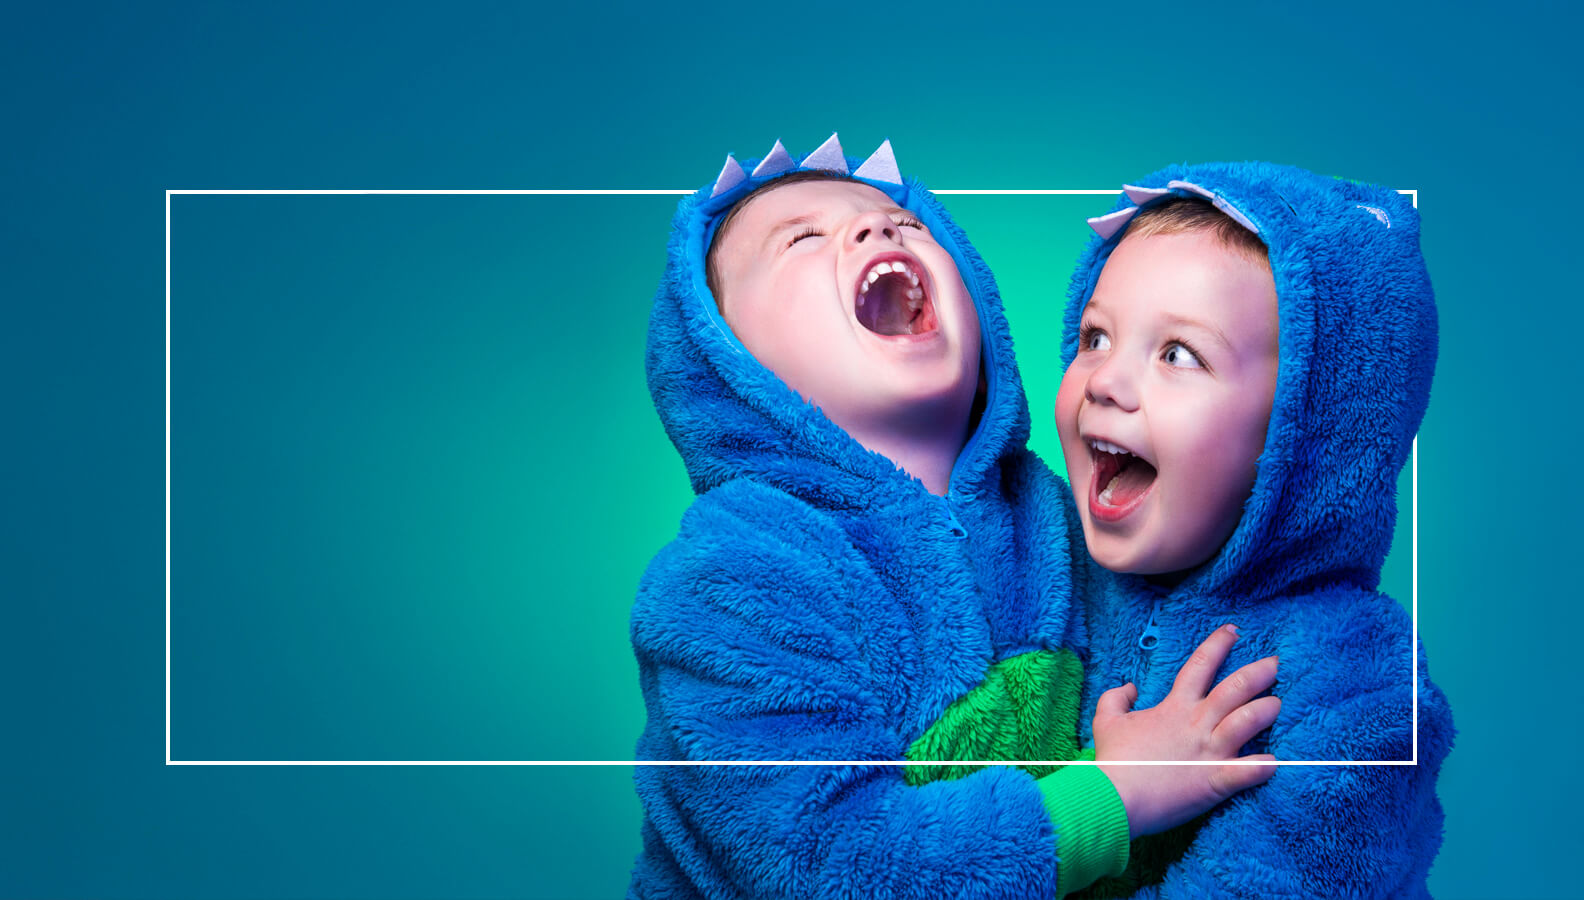 Child portrait of two brothers laughing and smiling in dinosaur onesies